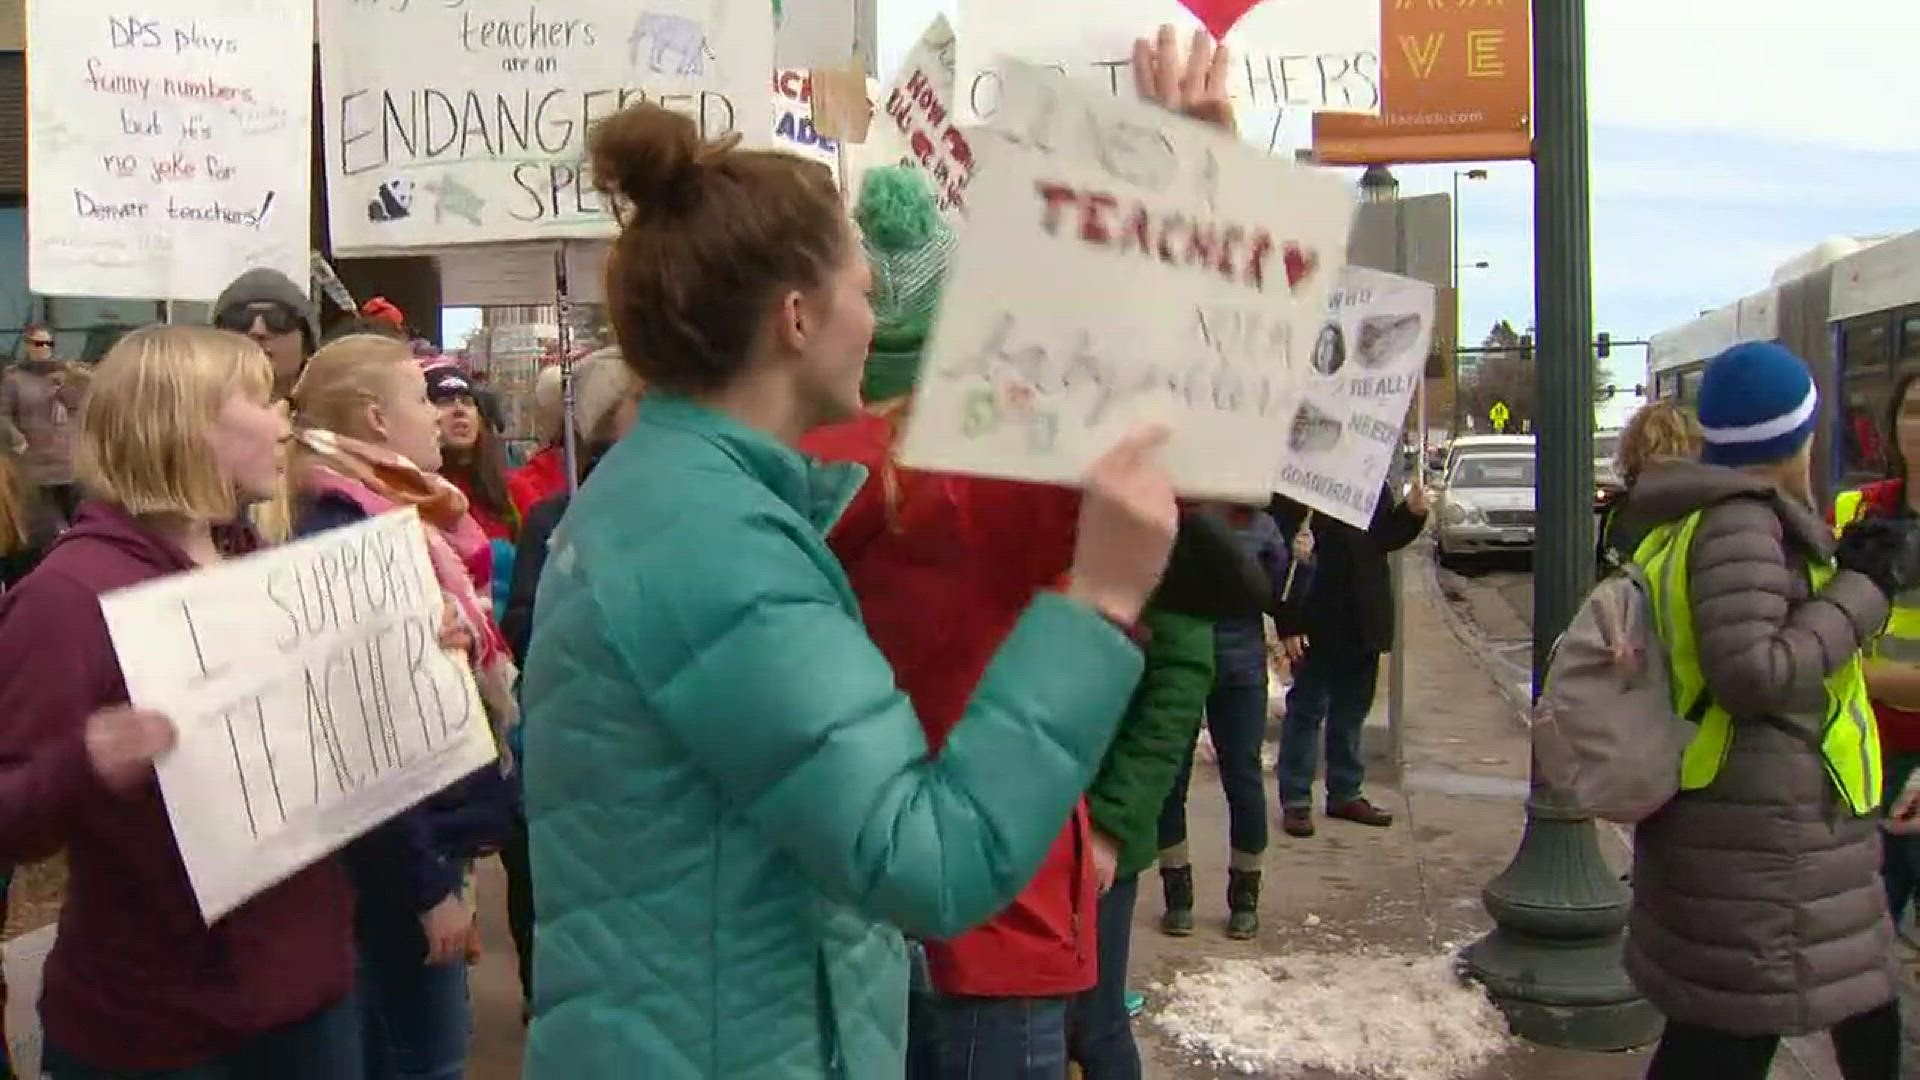 Hundreds of teachers descended on Civic Center Park for a second day of picketing on Tuesday.